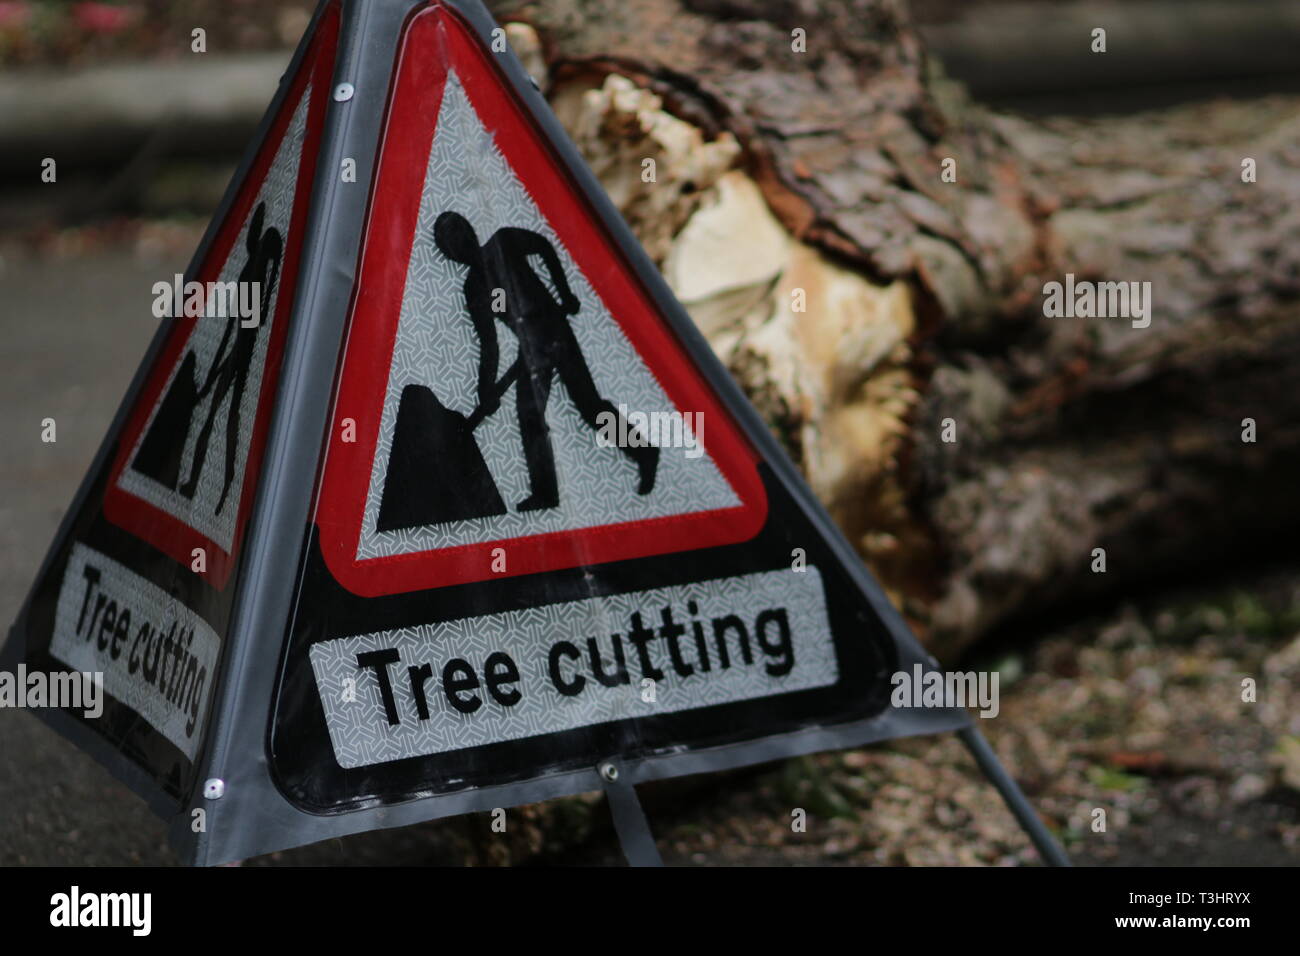 Warning sign Tree Cutting and the cut tree in the background at the park, photographed with shallow depth of field. Stock Photo